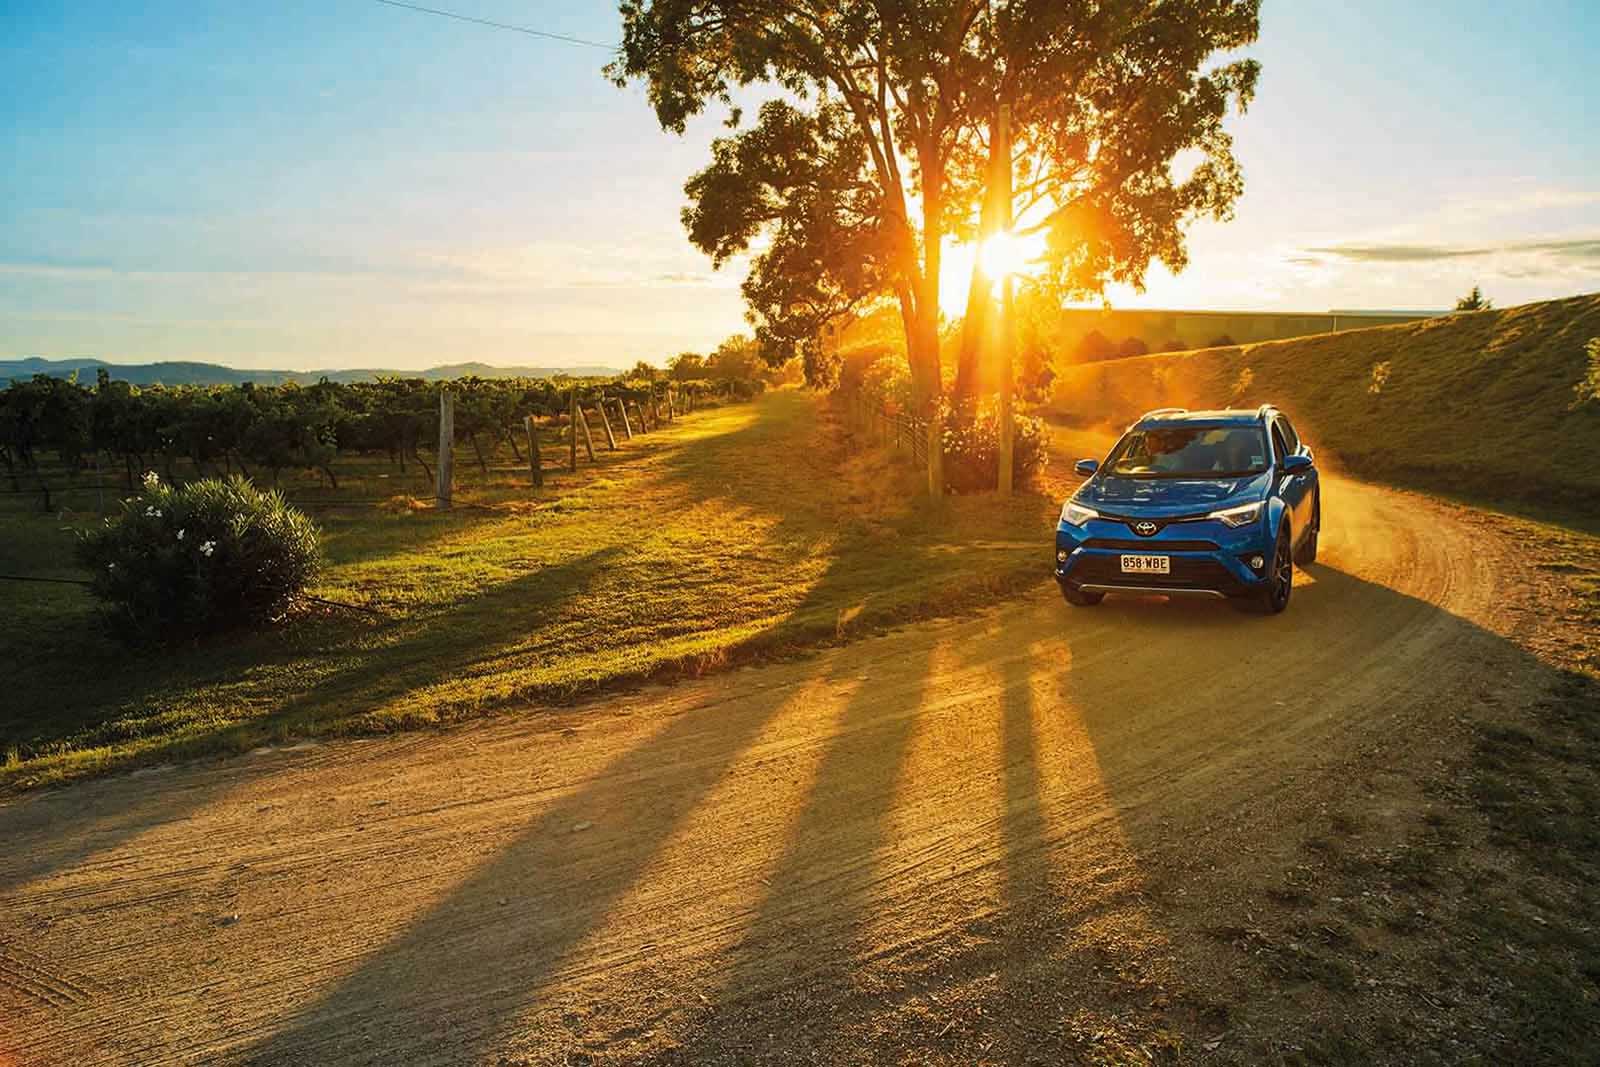 Granite Belt, Southern Queensland Country | Have wheels will travel: the best scenic drives from Brisbane Airport in a rental car